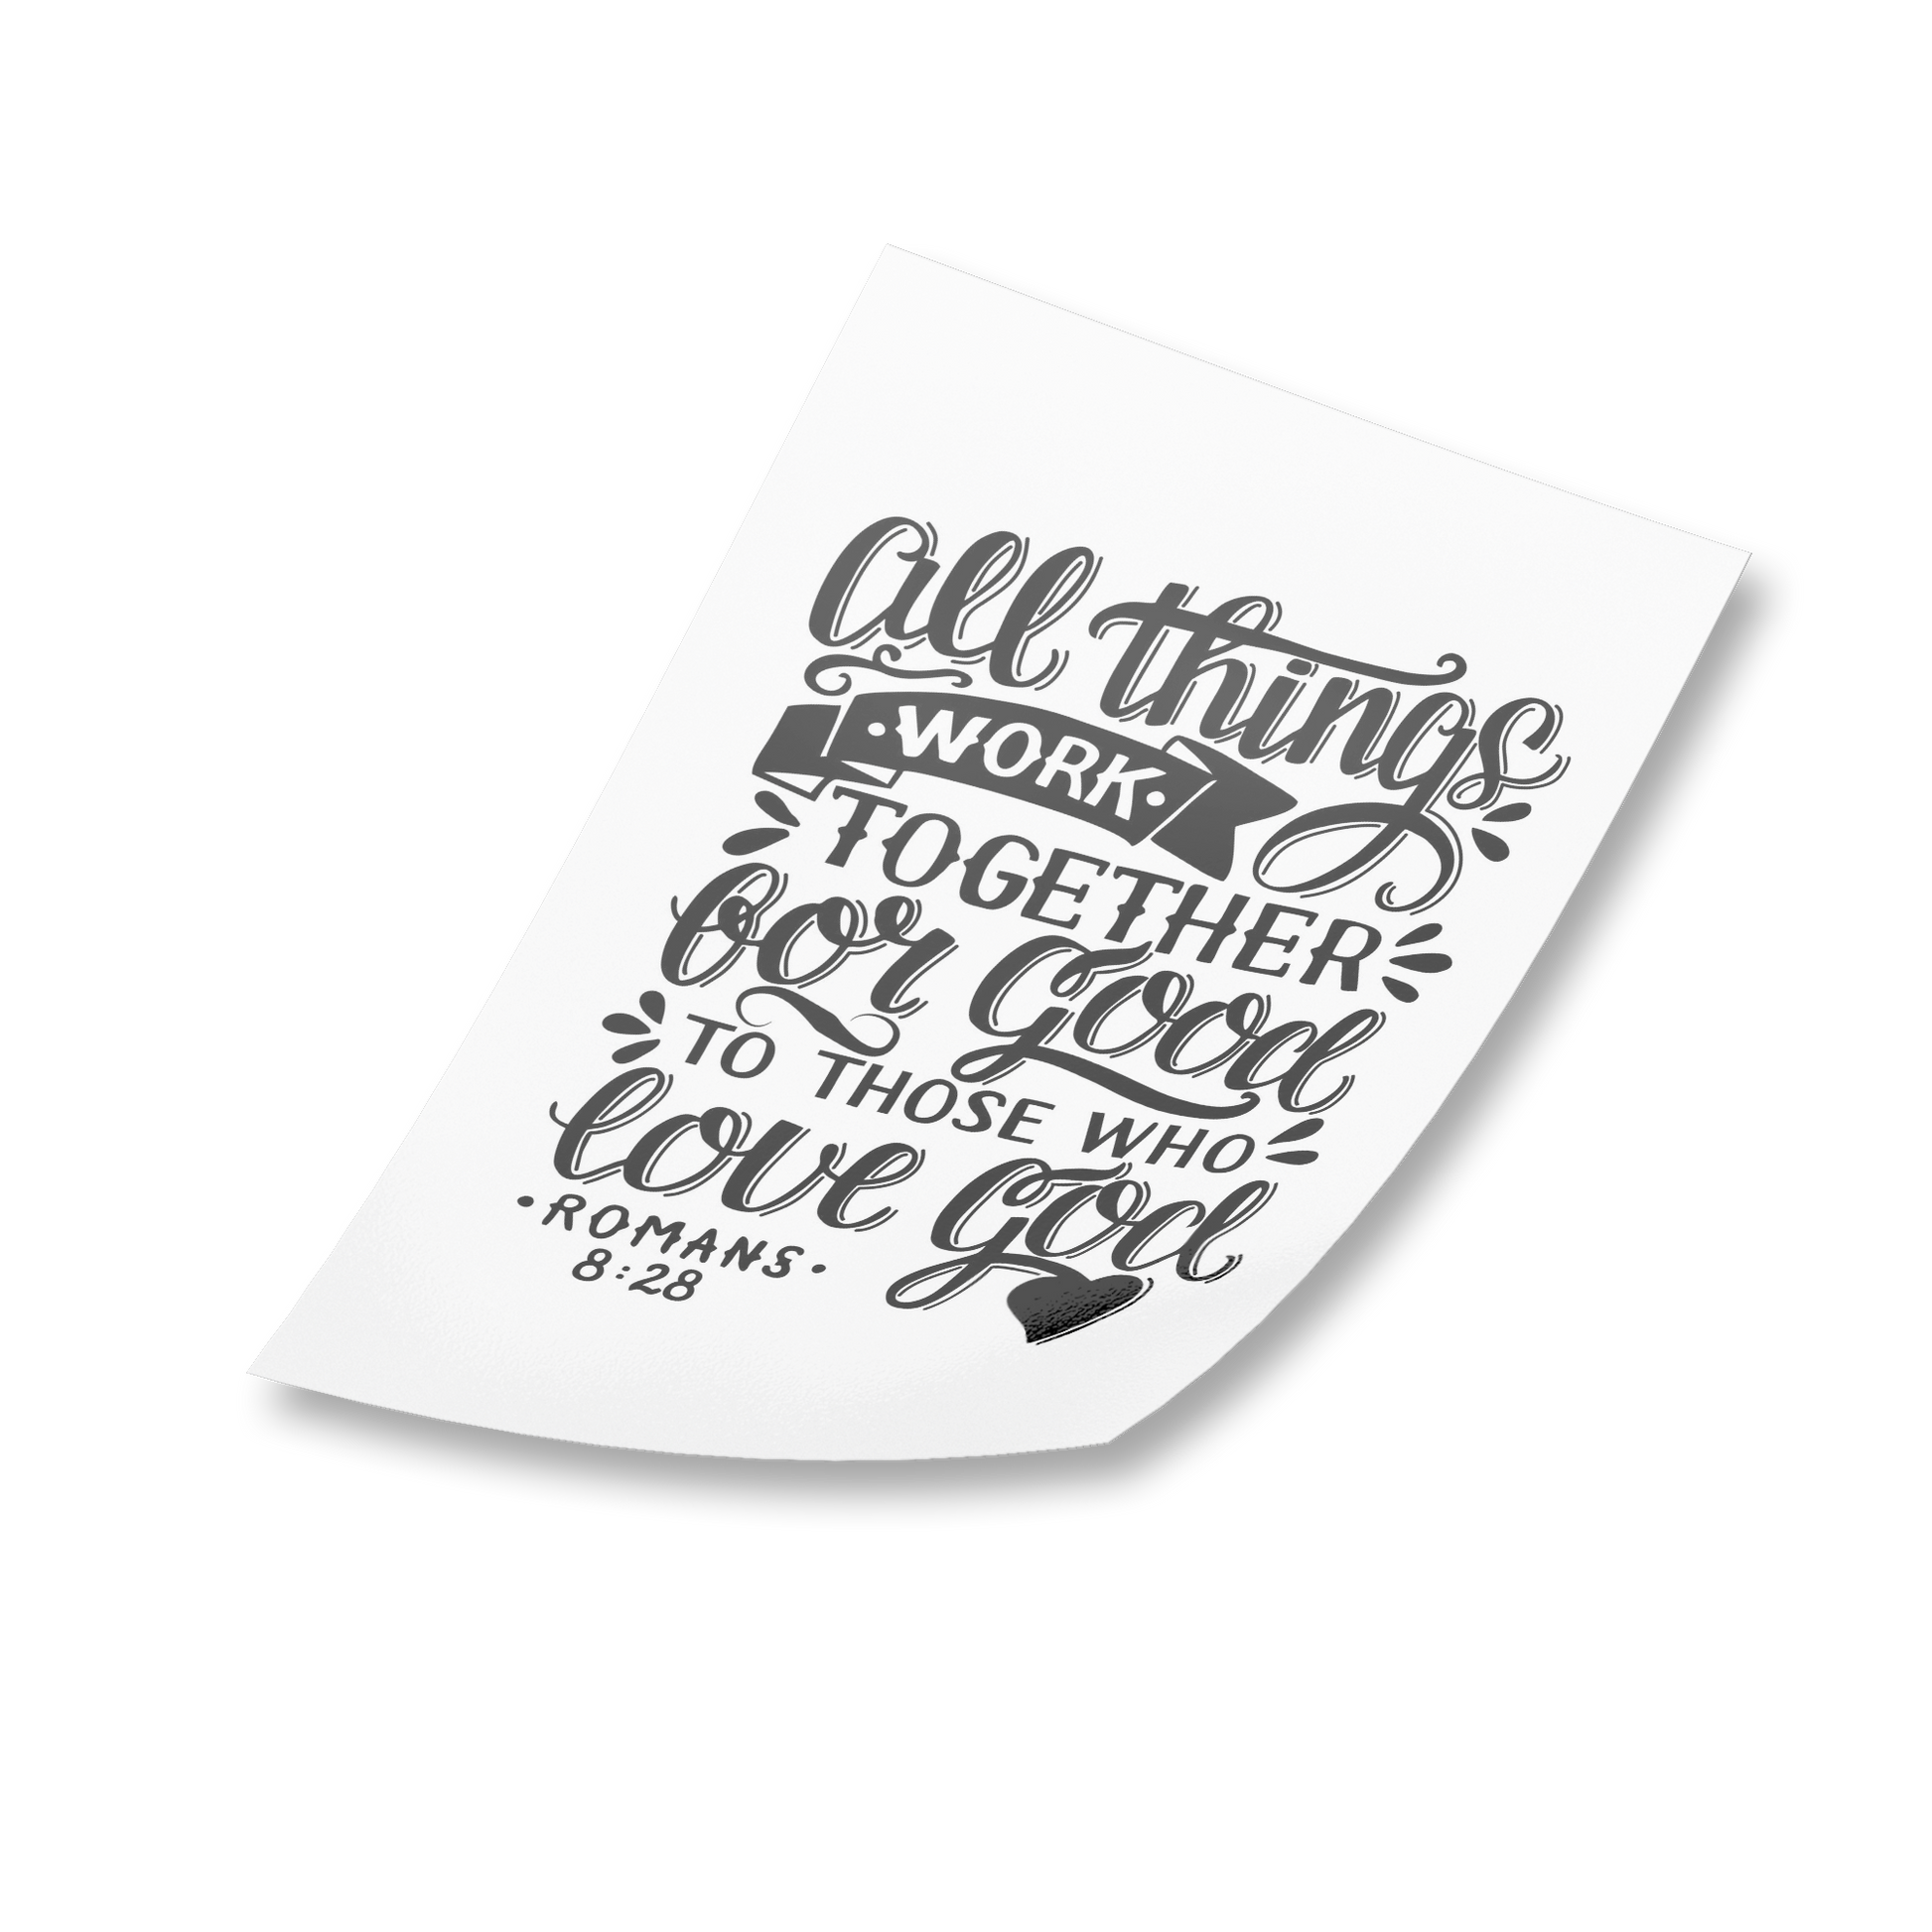 All Things Work Together For Good To Those Who Love God, Romans 8:28 - Black on White Rectangle Sticker sideways